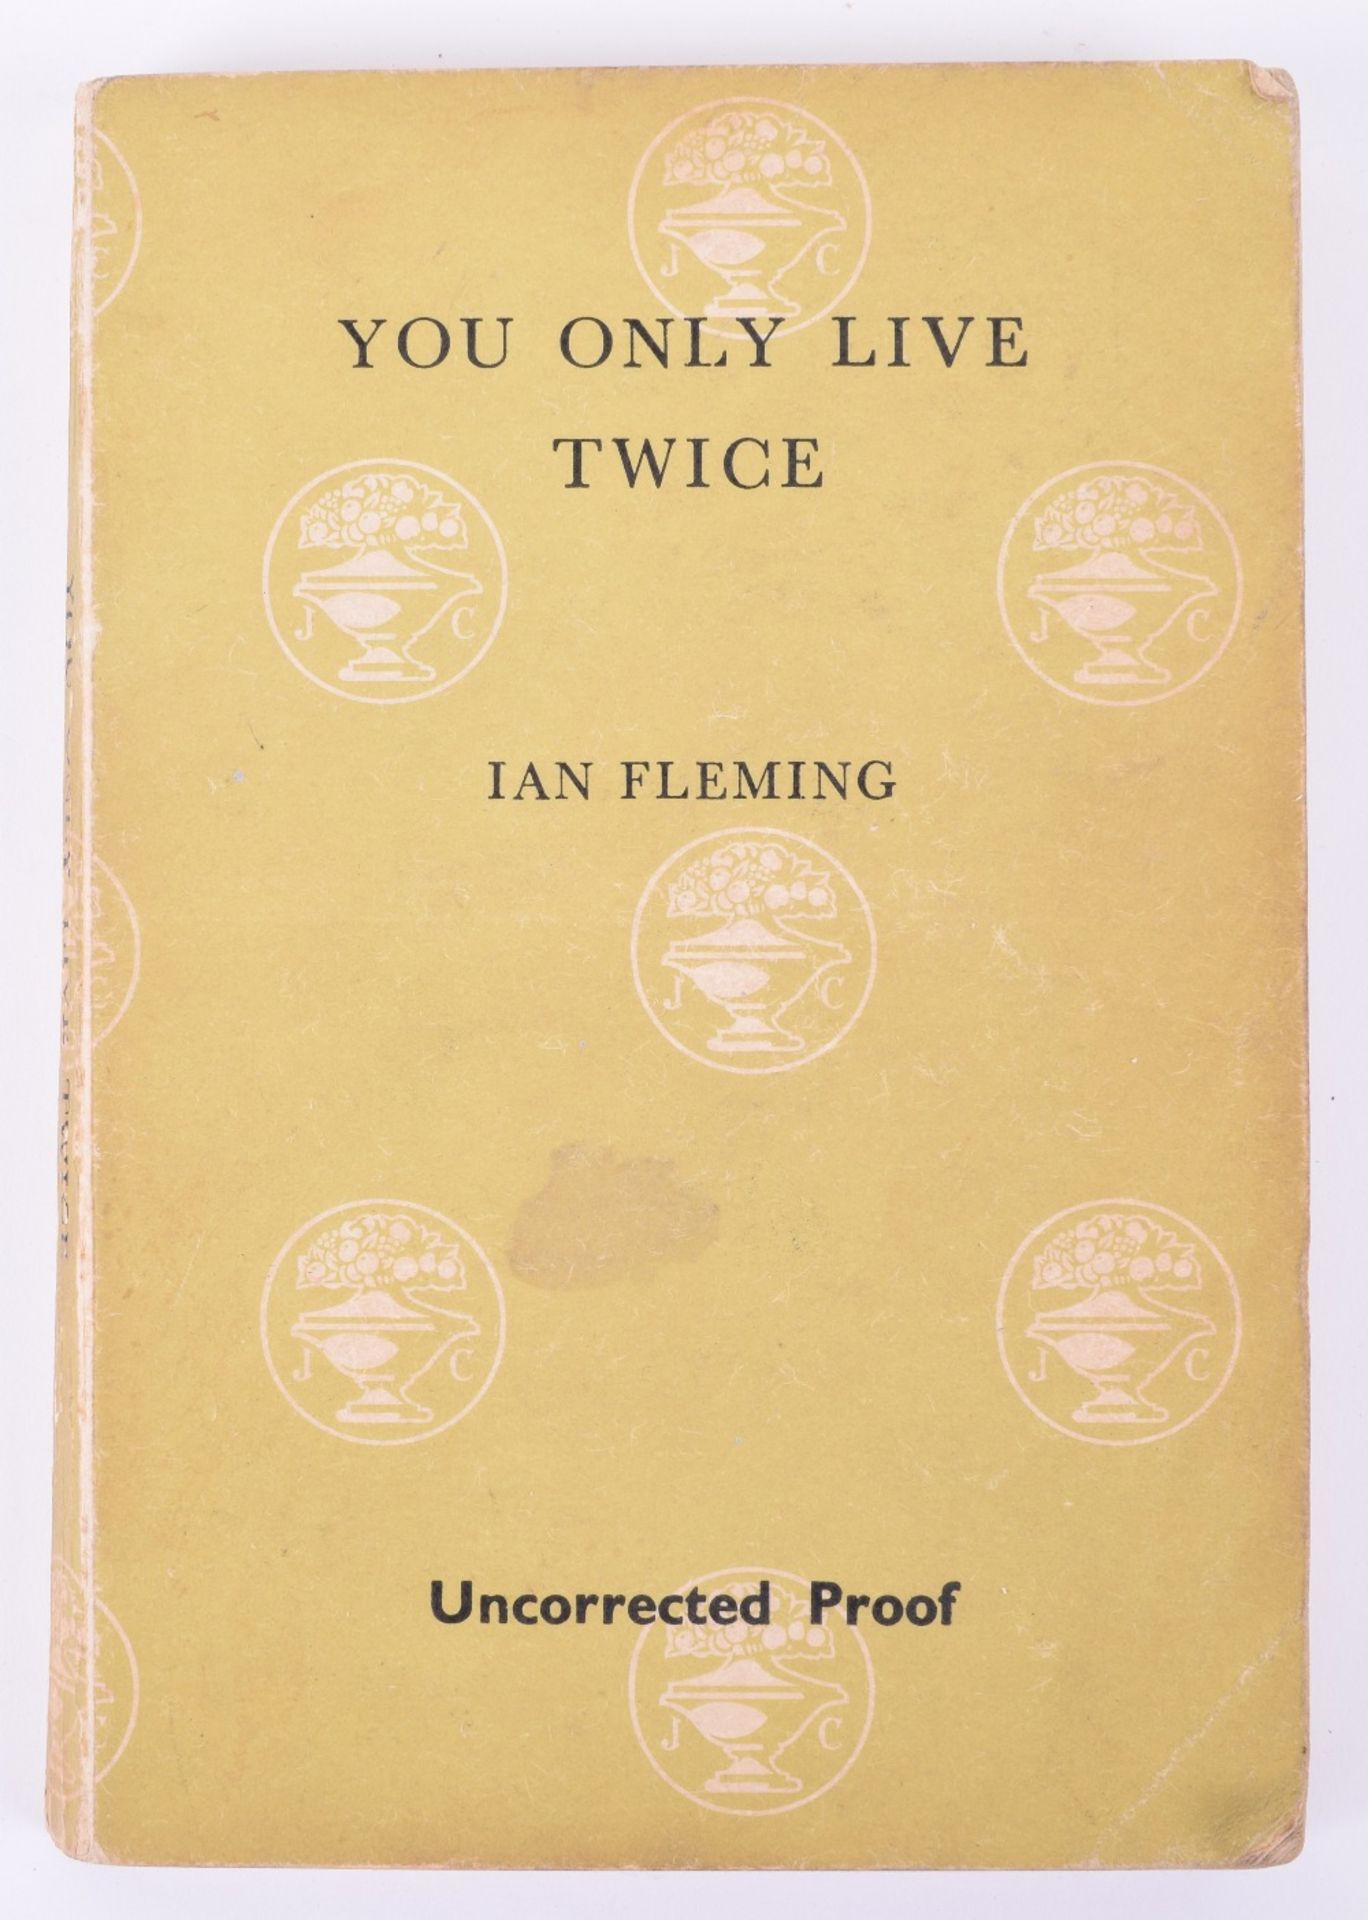 Rare Ian Fleming, James Bond You Only Live Twice, Uncorrected Proof dated 1964